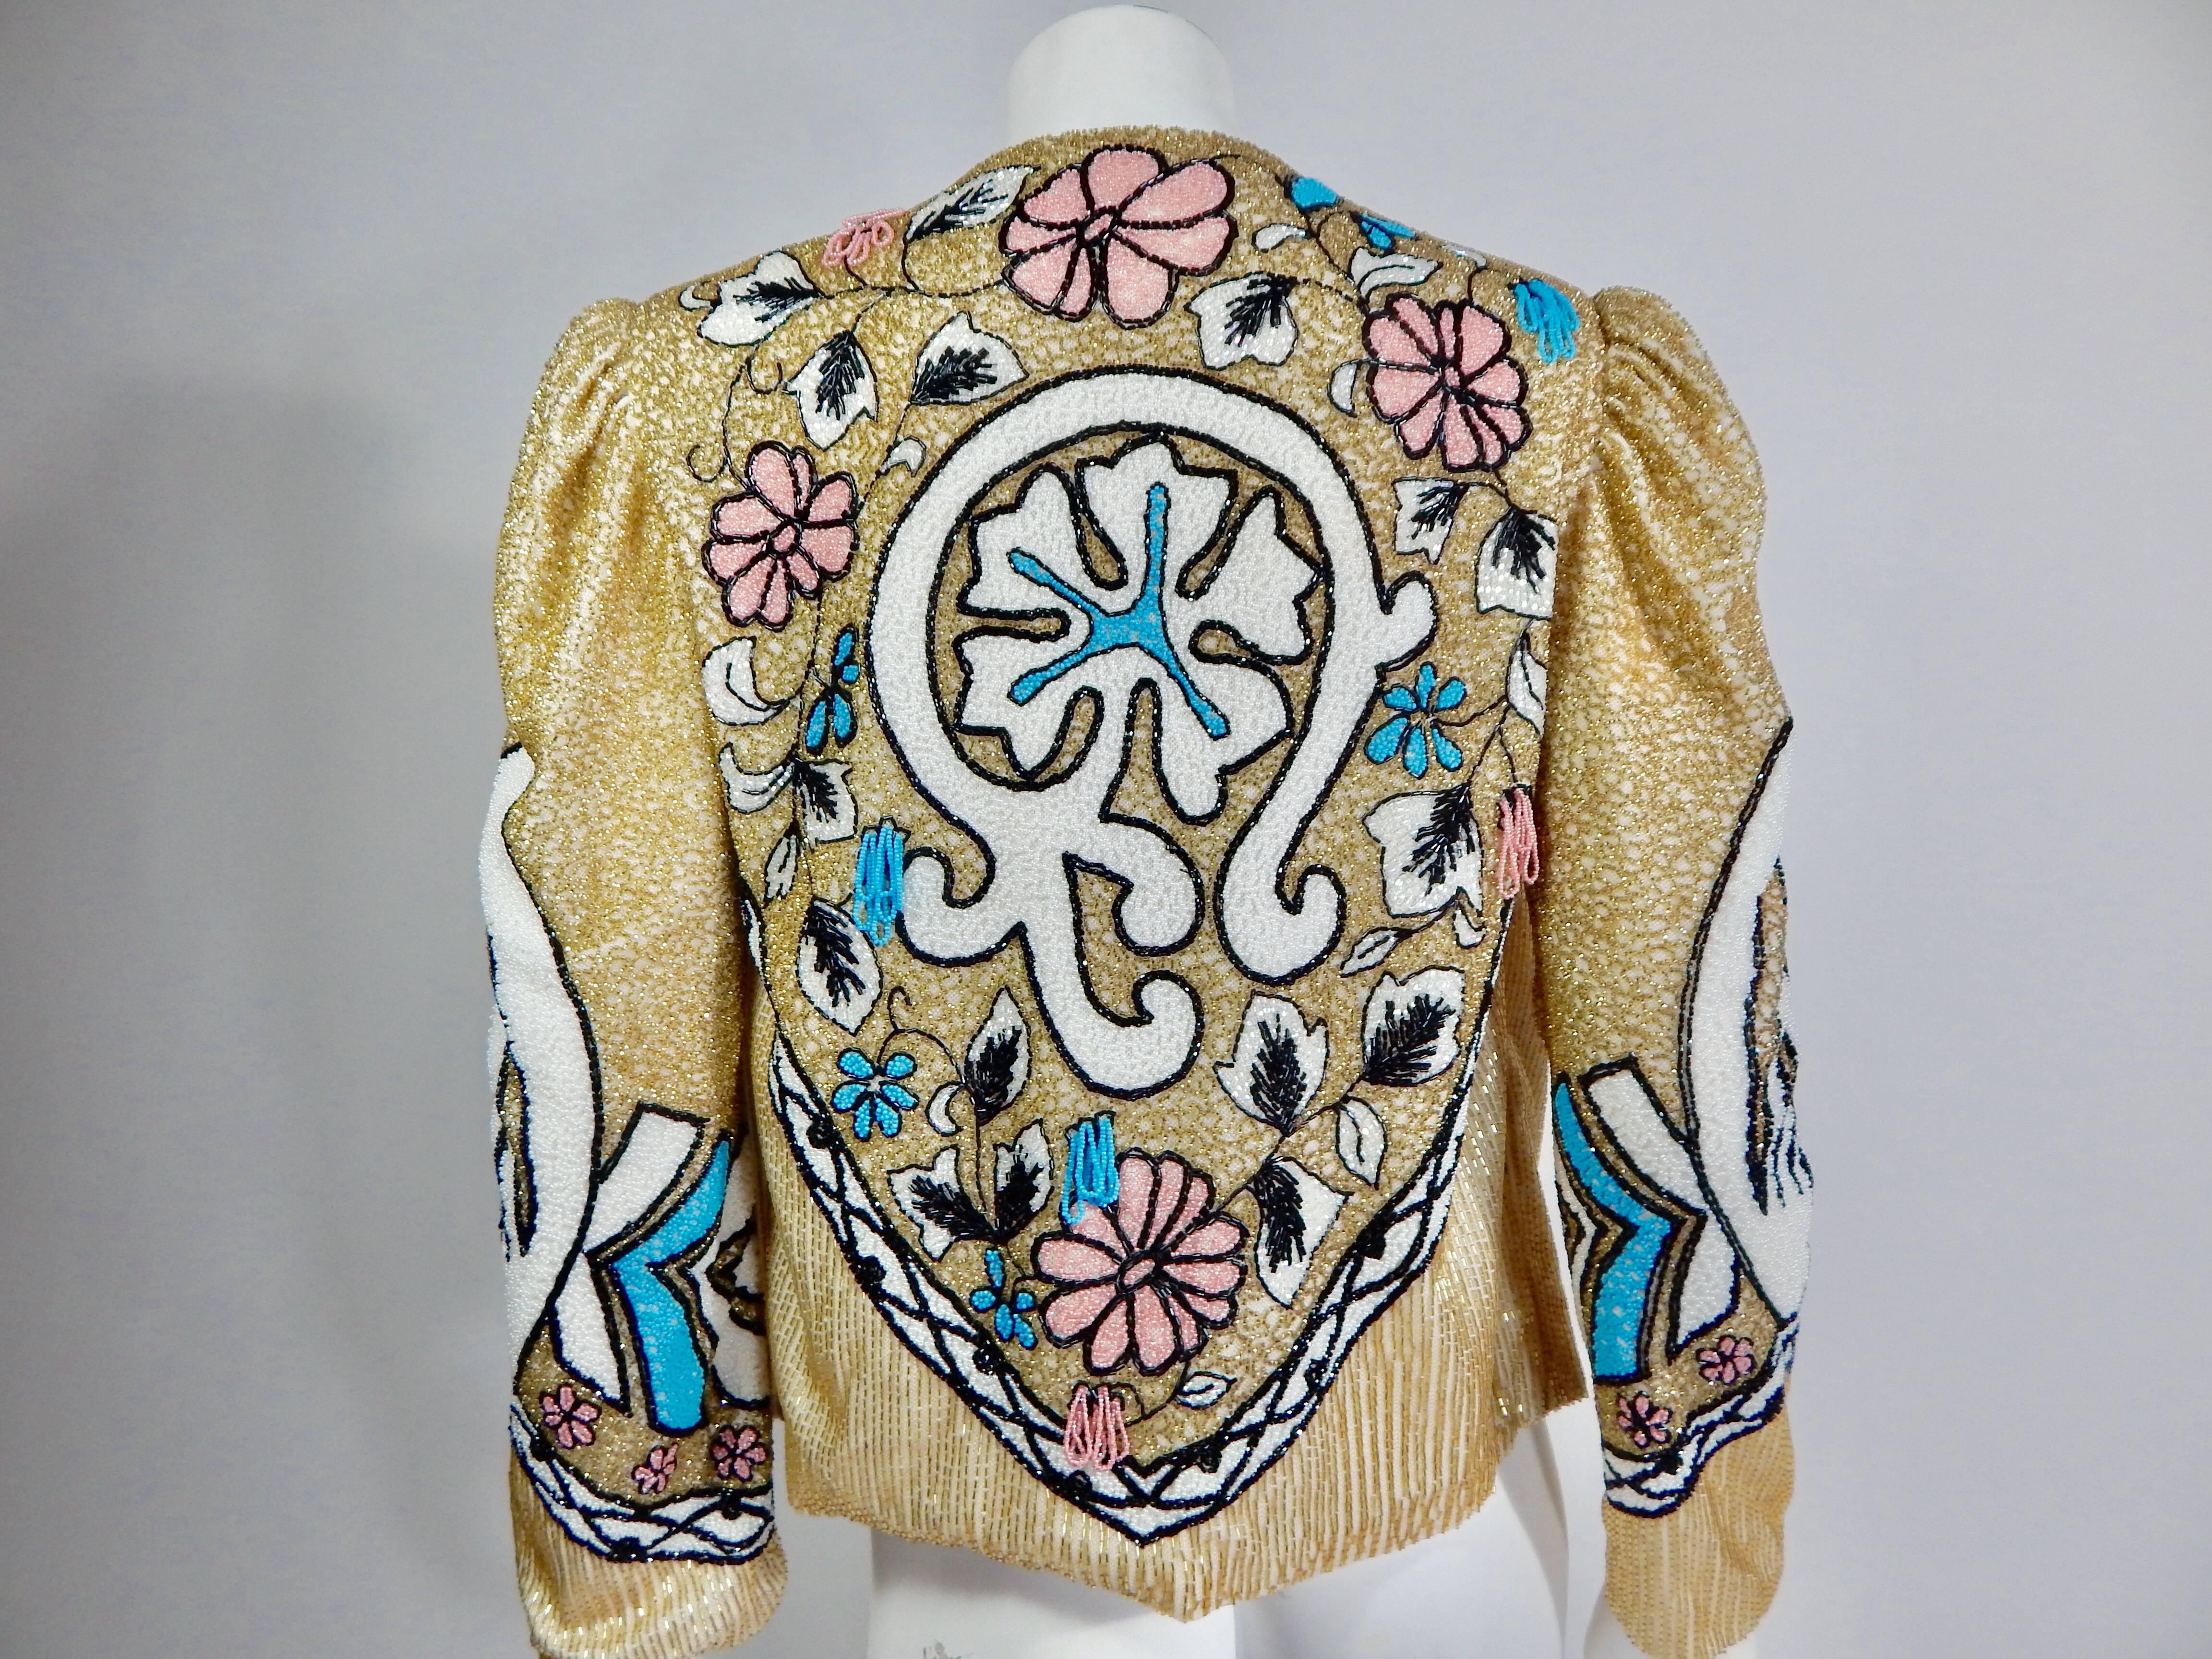 Fabulous late  1970s / early  1980s Beaded Jacket. Entirely covered in beautiful bead work.   Completely lined in off white silk. Multicolored Gold, blue, pink, black and white beading.